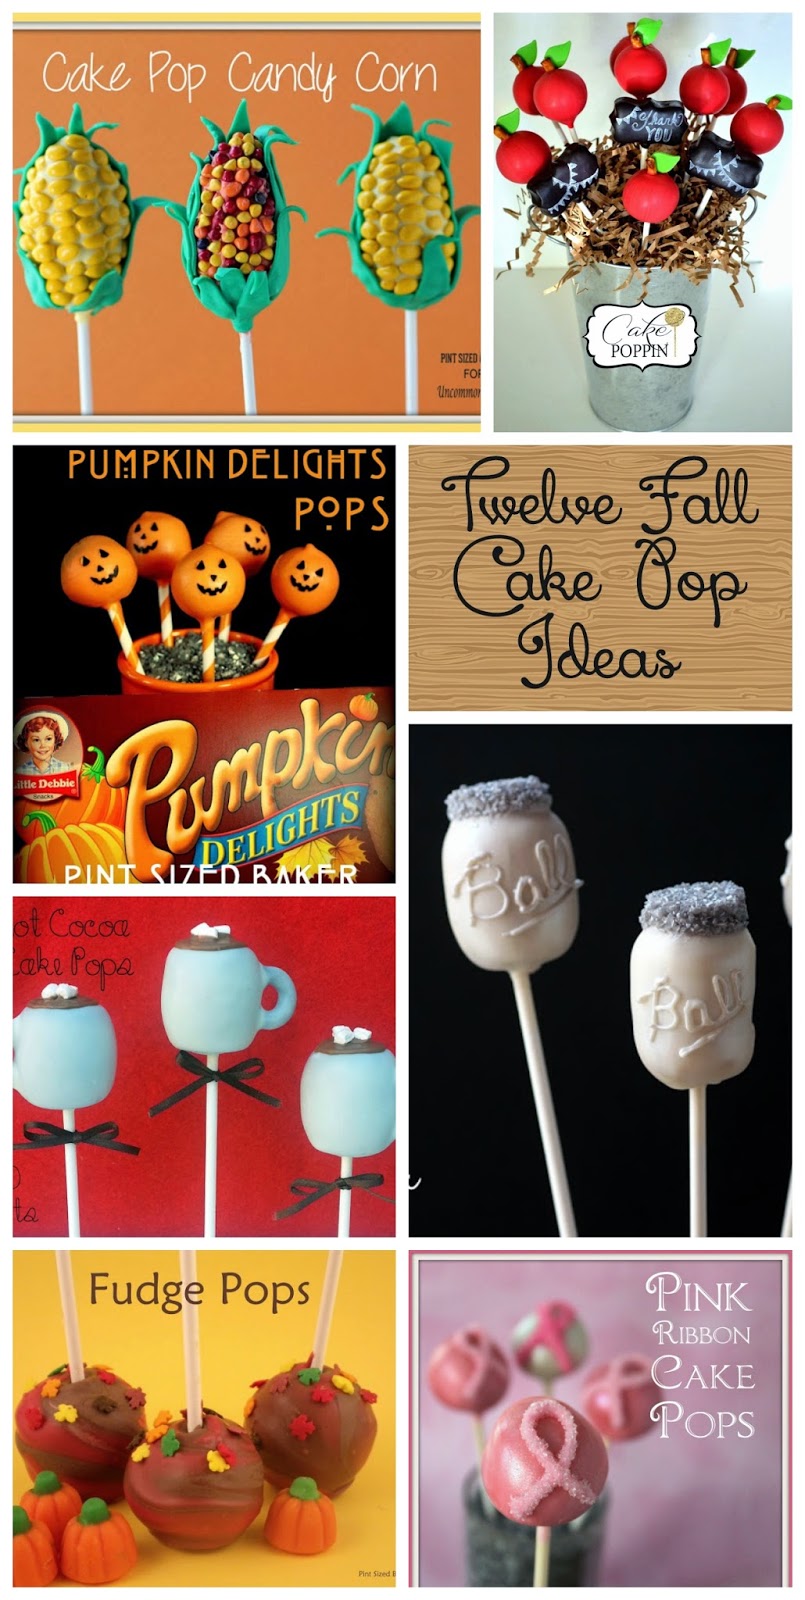 Twelve Fall Cake Pops ideas to get you ready for the season!